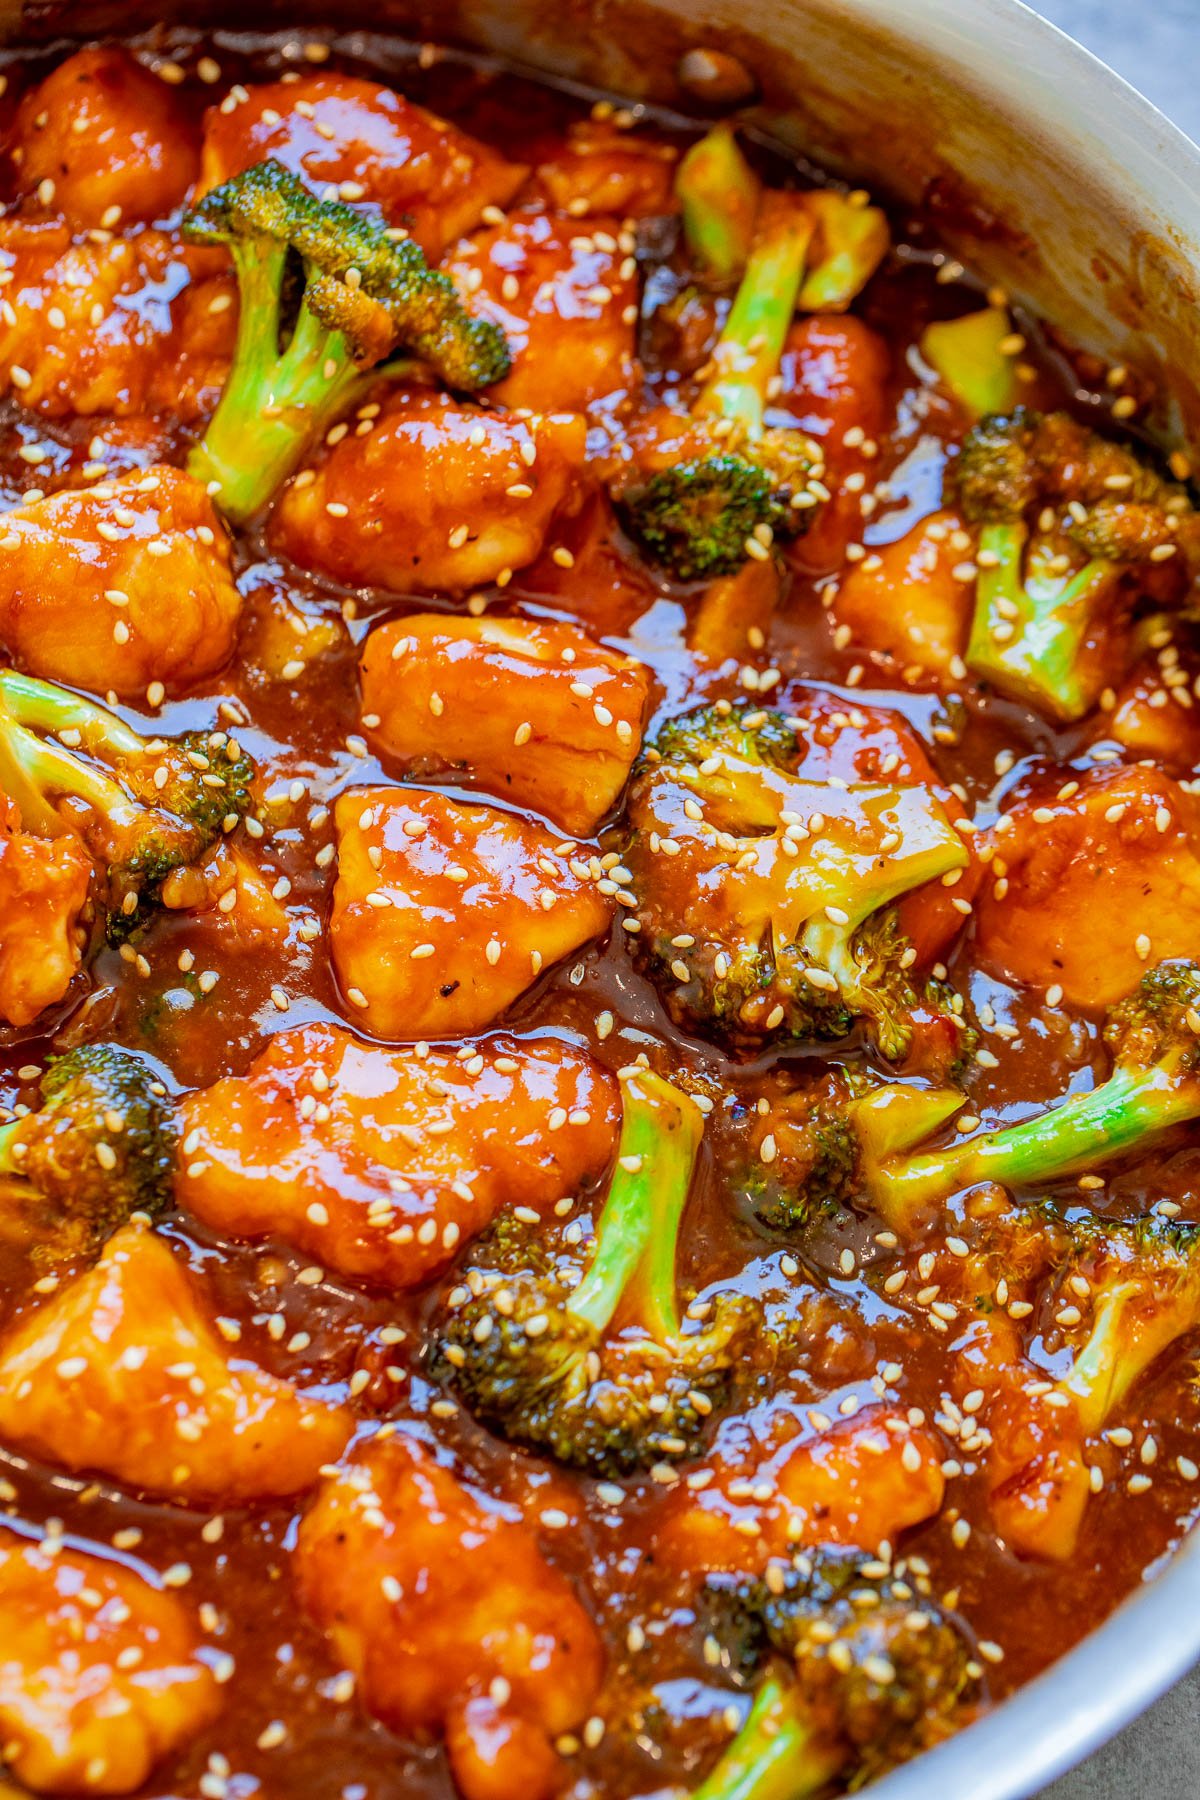 A close-up view of a dish featuring broccoli and chunks of chicken coated in a thick, glossy sauce, garnished with sesame seeds.